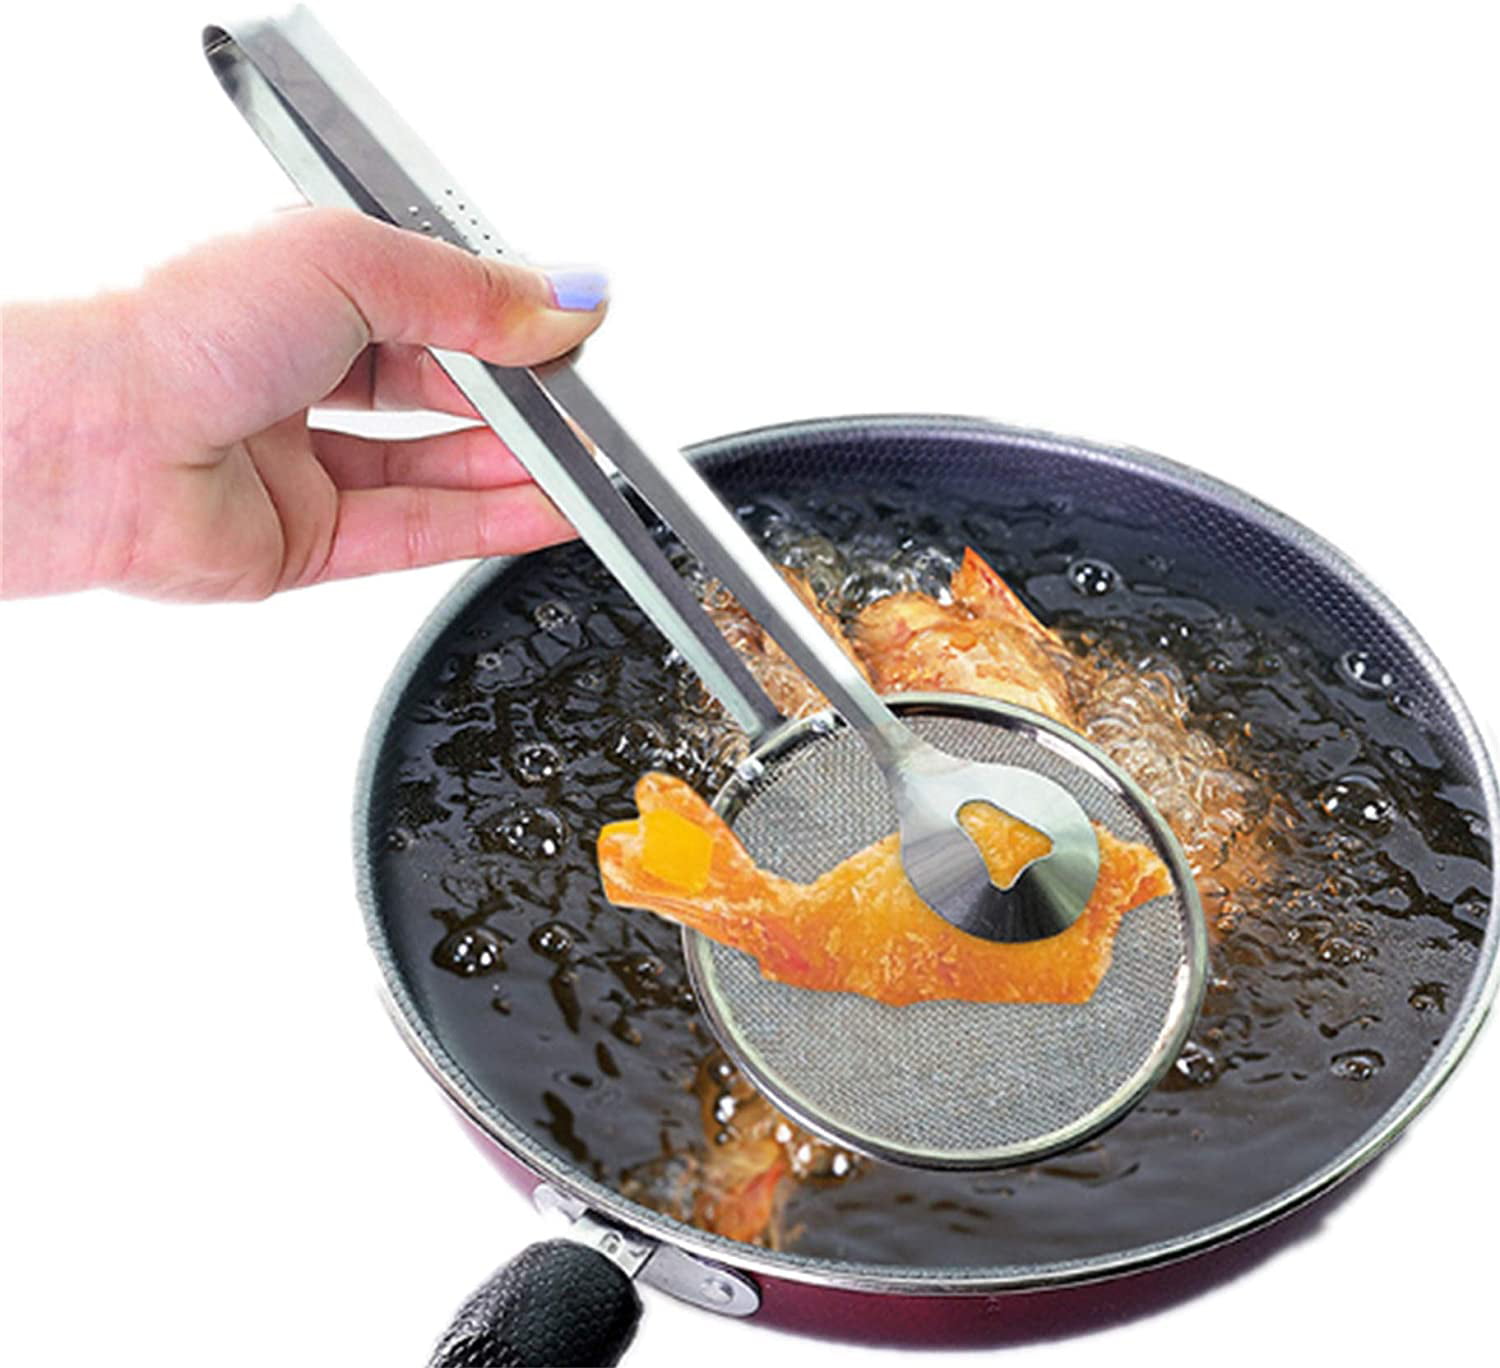 Salad BBQ Multi-Functional Kitchen Tool JKKJ Oil-Frying Filter Spoon With Clip，2 in 1 Stainless Steel Mesh Strainer Filter Spoon Ladle Colander Clip Skimmer for Fried Food 